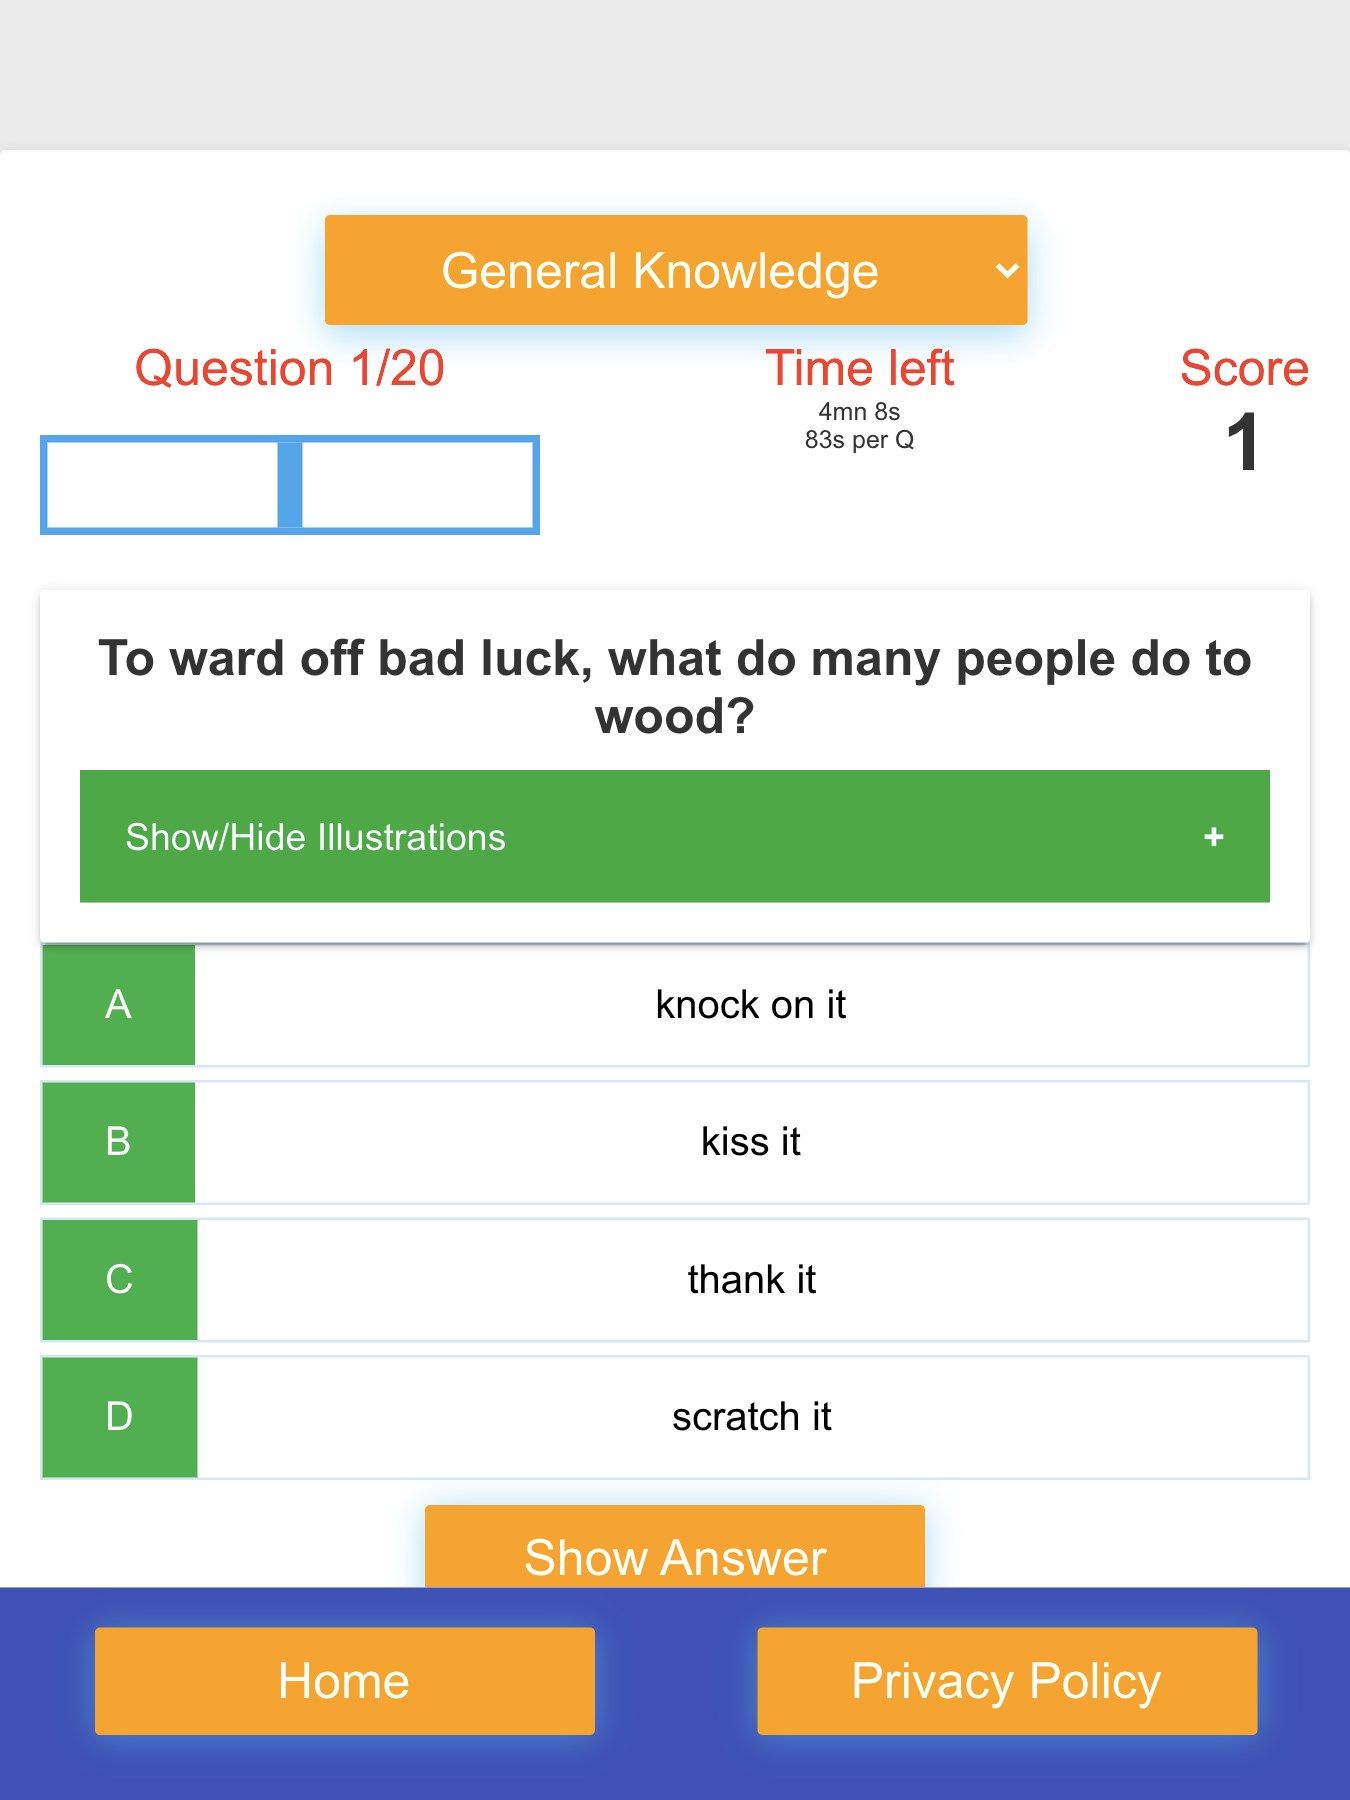 Quiz Trivia and Brain Teaser All Subjects